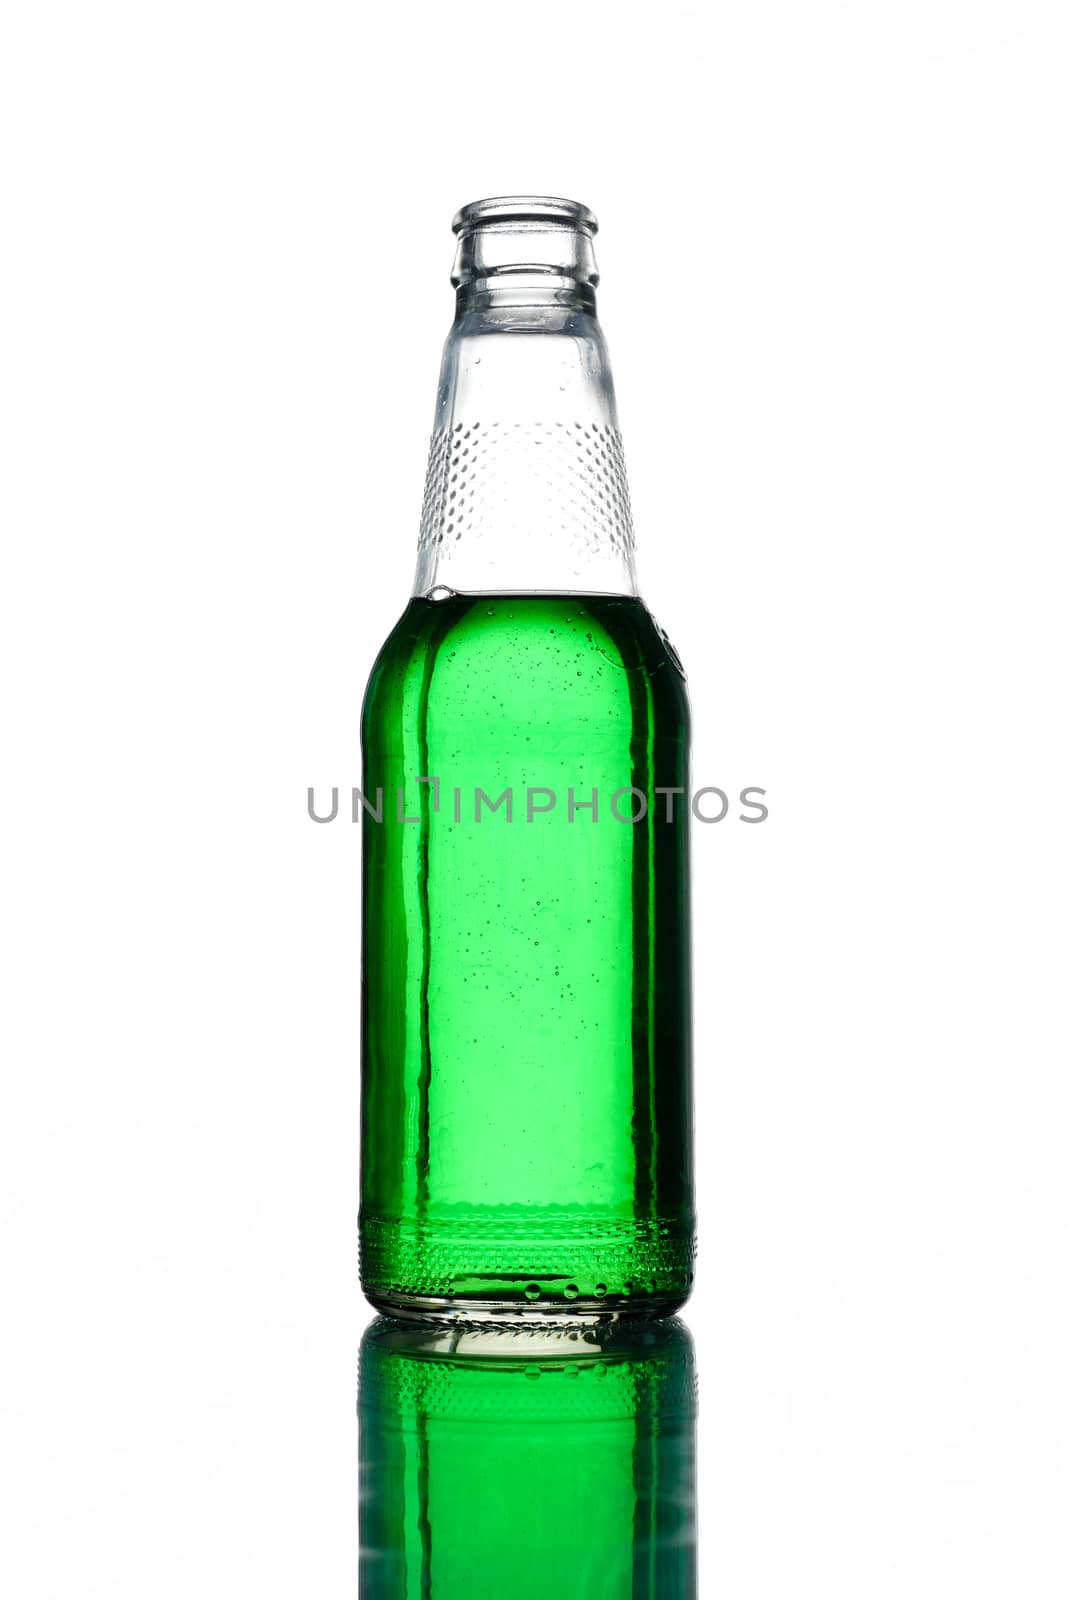 Bottle of green liquid isolated on white background by ronnarong